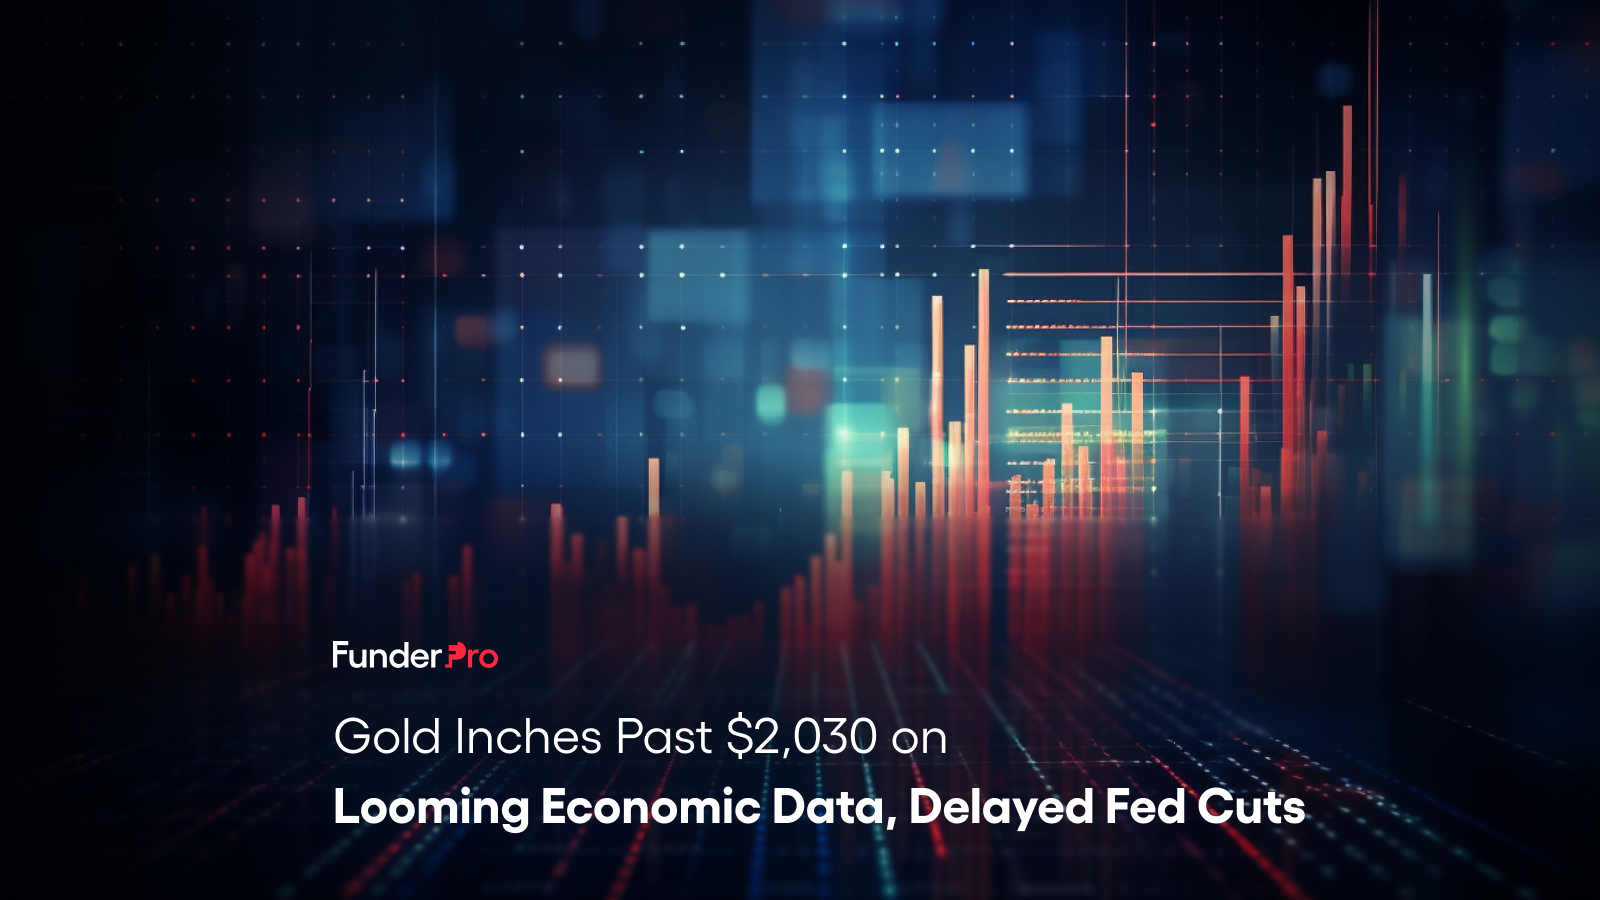 Gold Inches Past $2,030 on Looming Economic Data, Delayed Fed Cuts